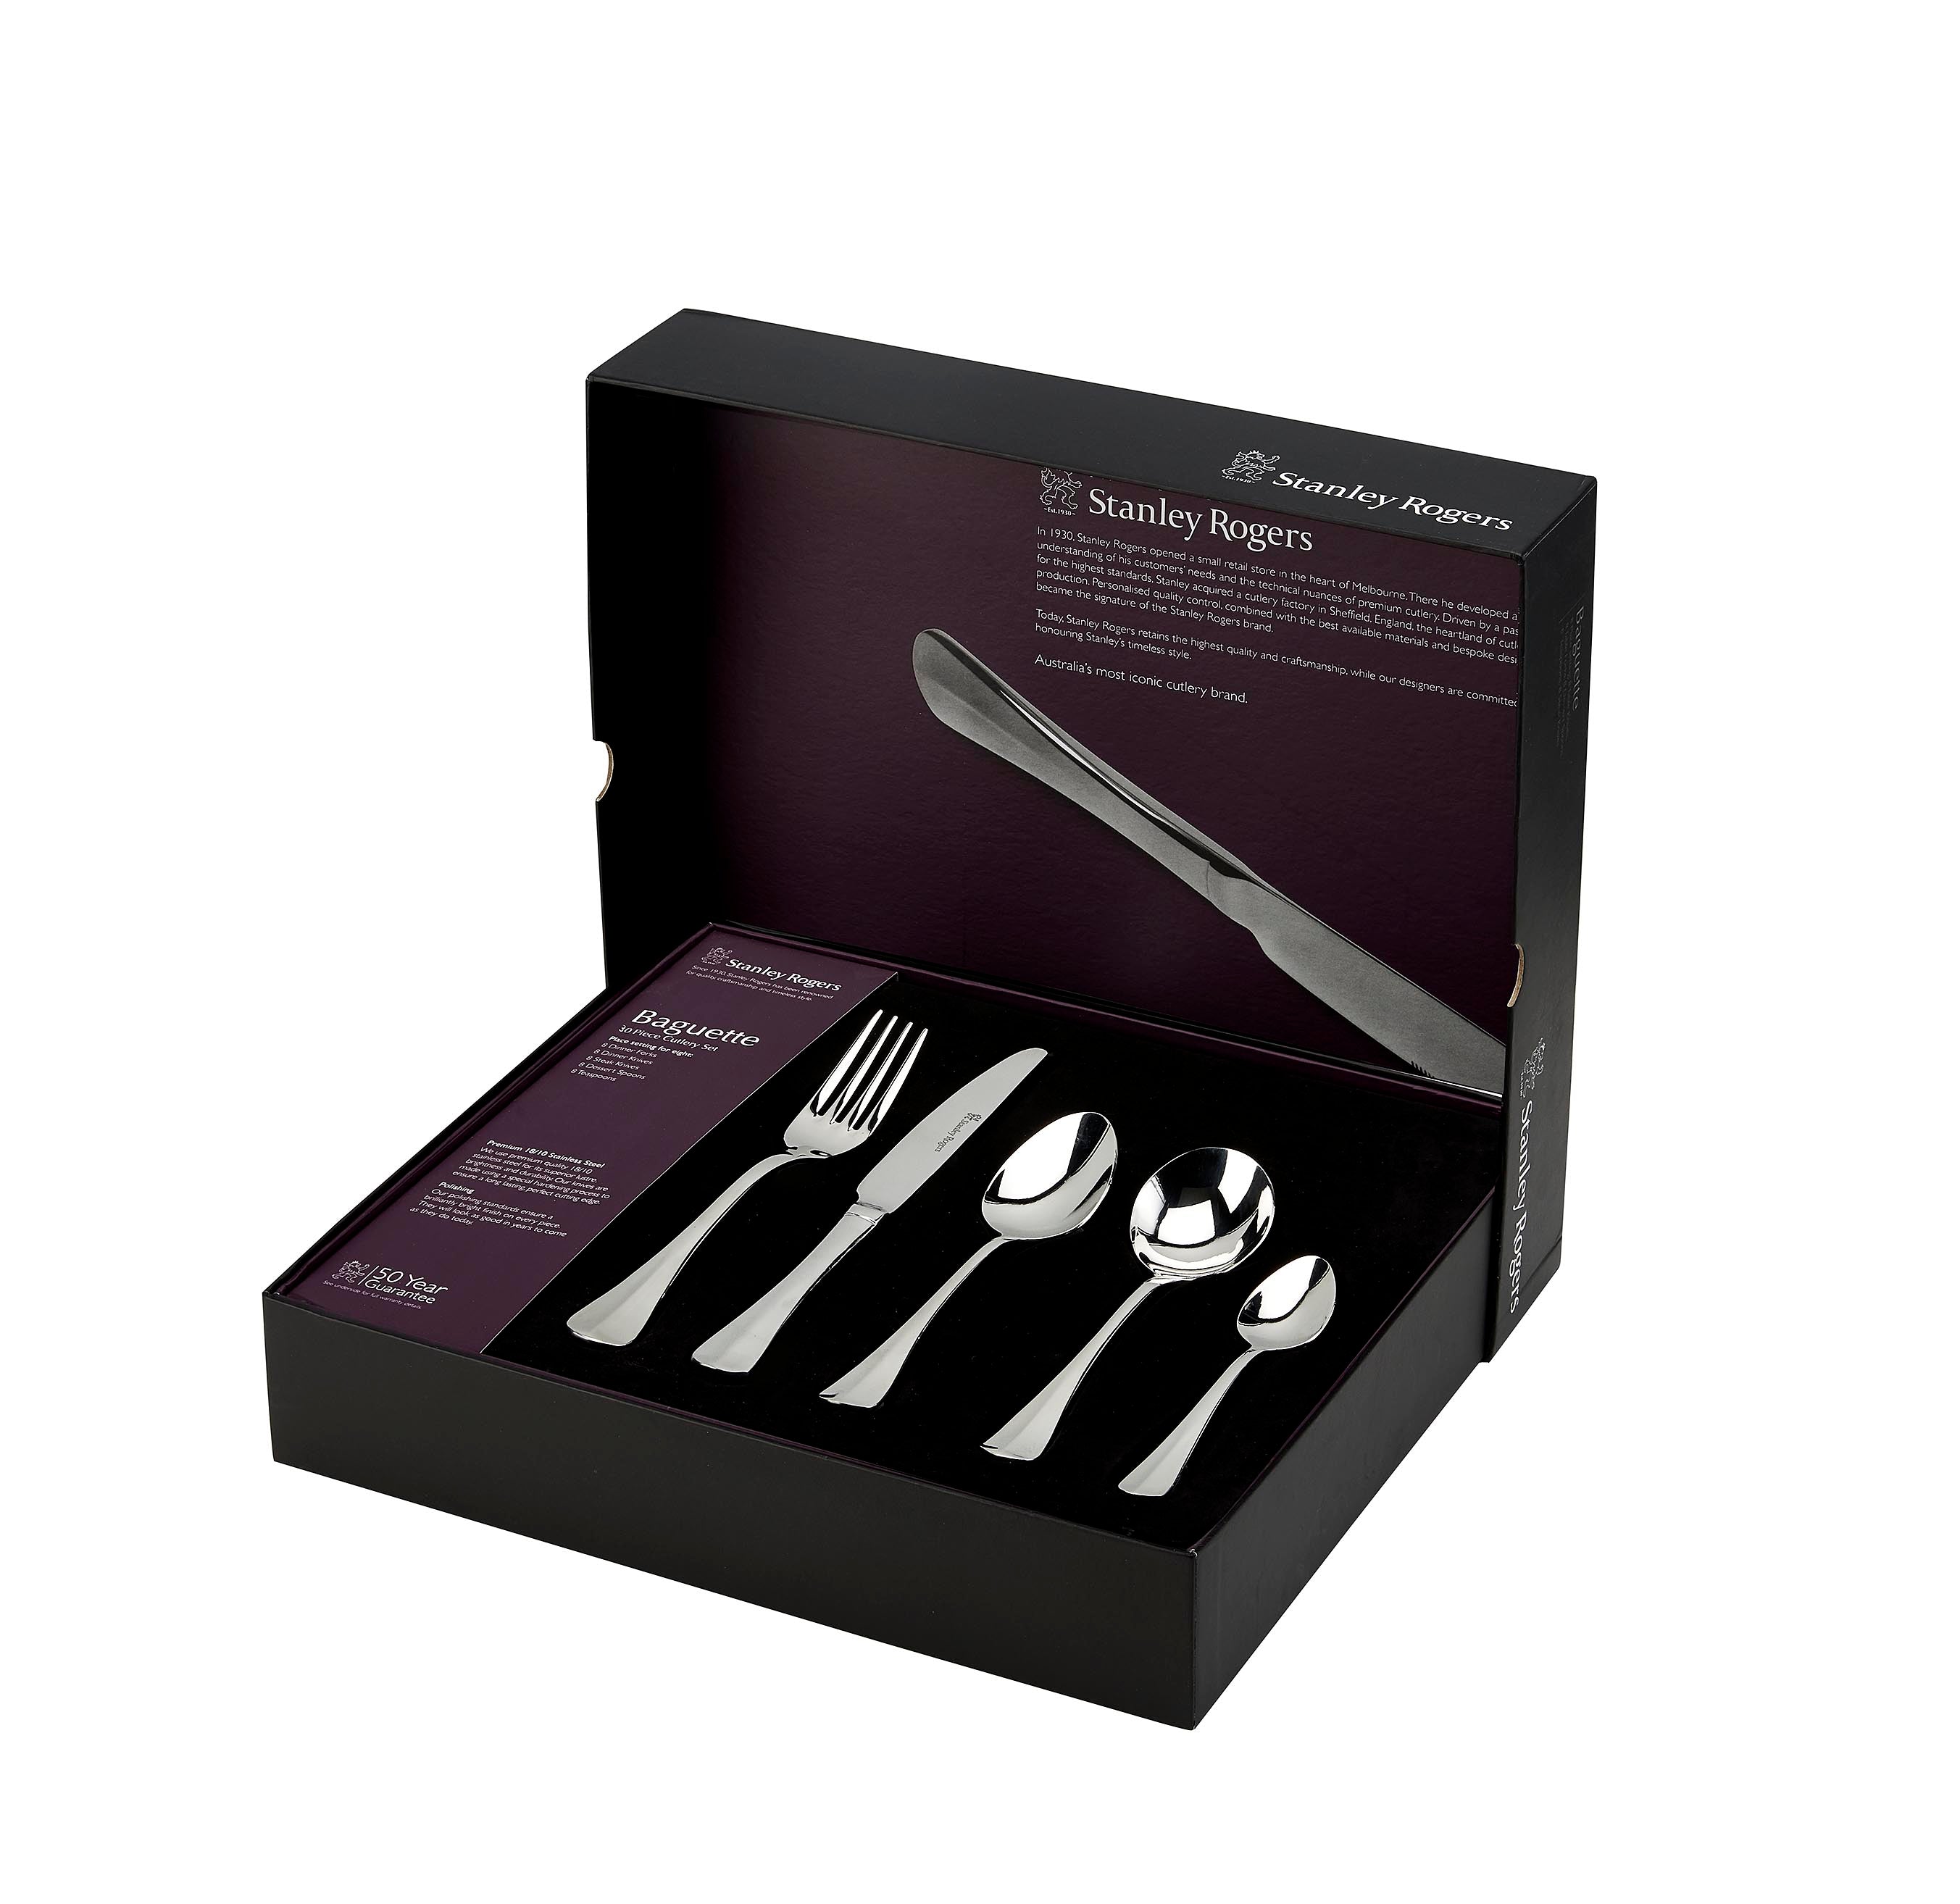 Stanley Rogers 30 Piece Baguette Cutlery Gift Boxed Set